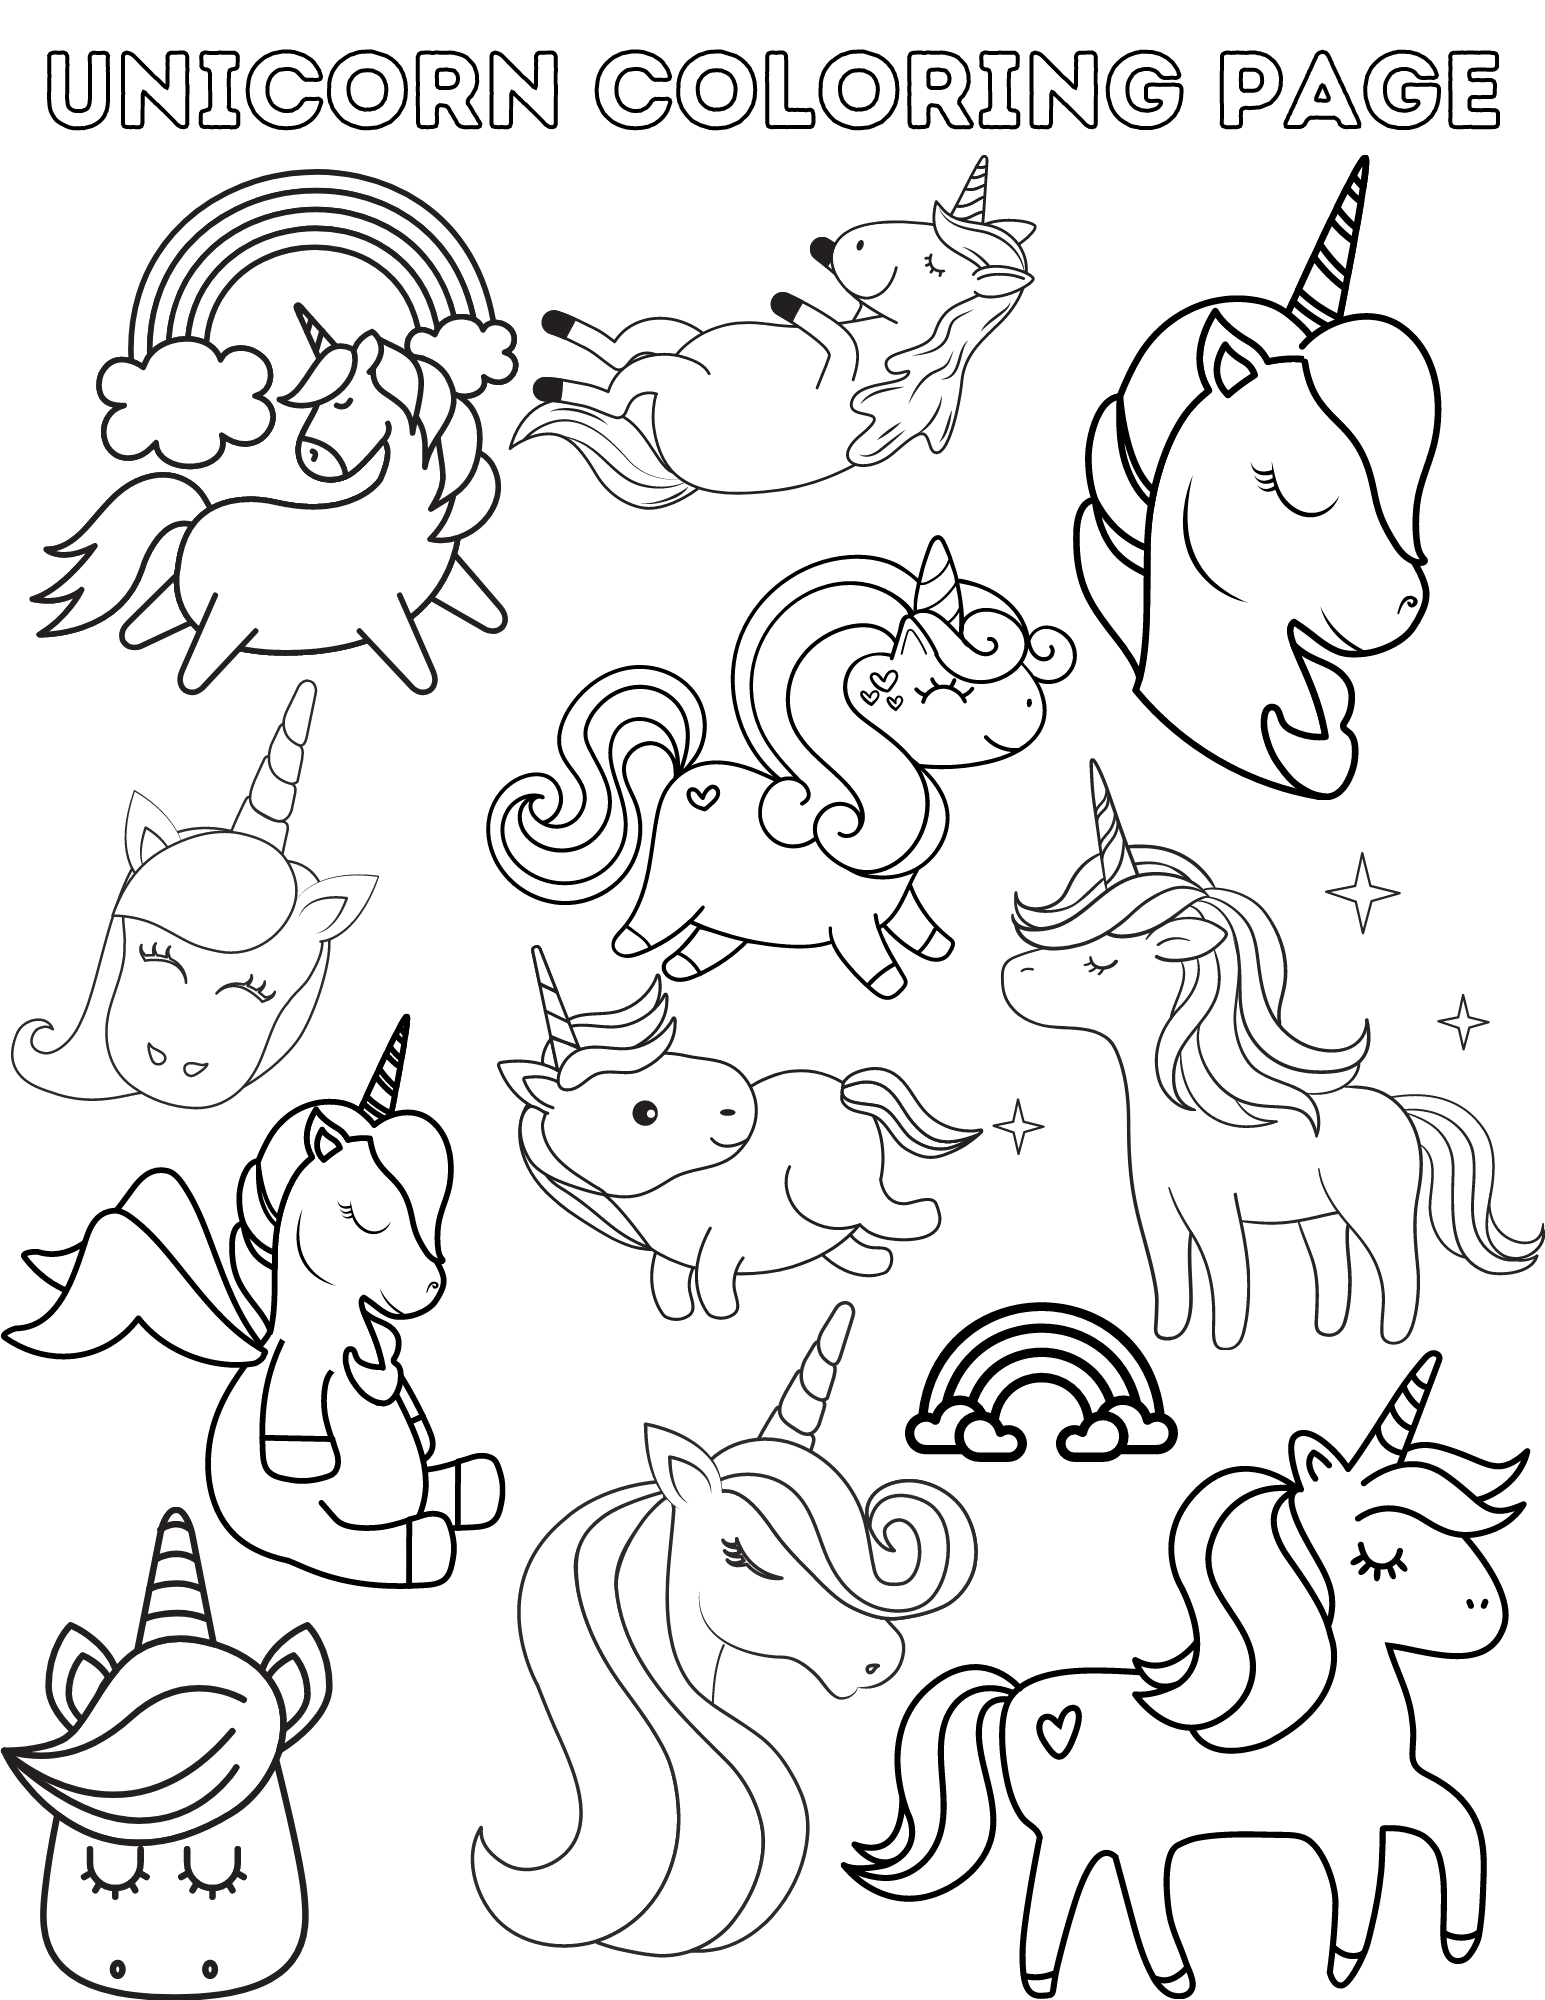 Unicorn Coloring Page 1